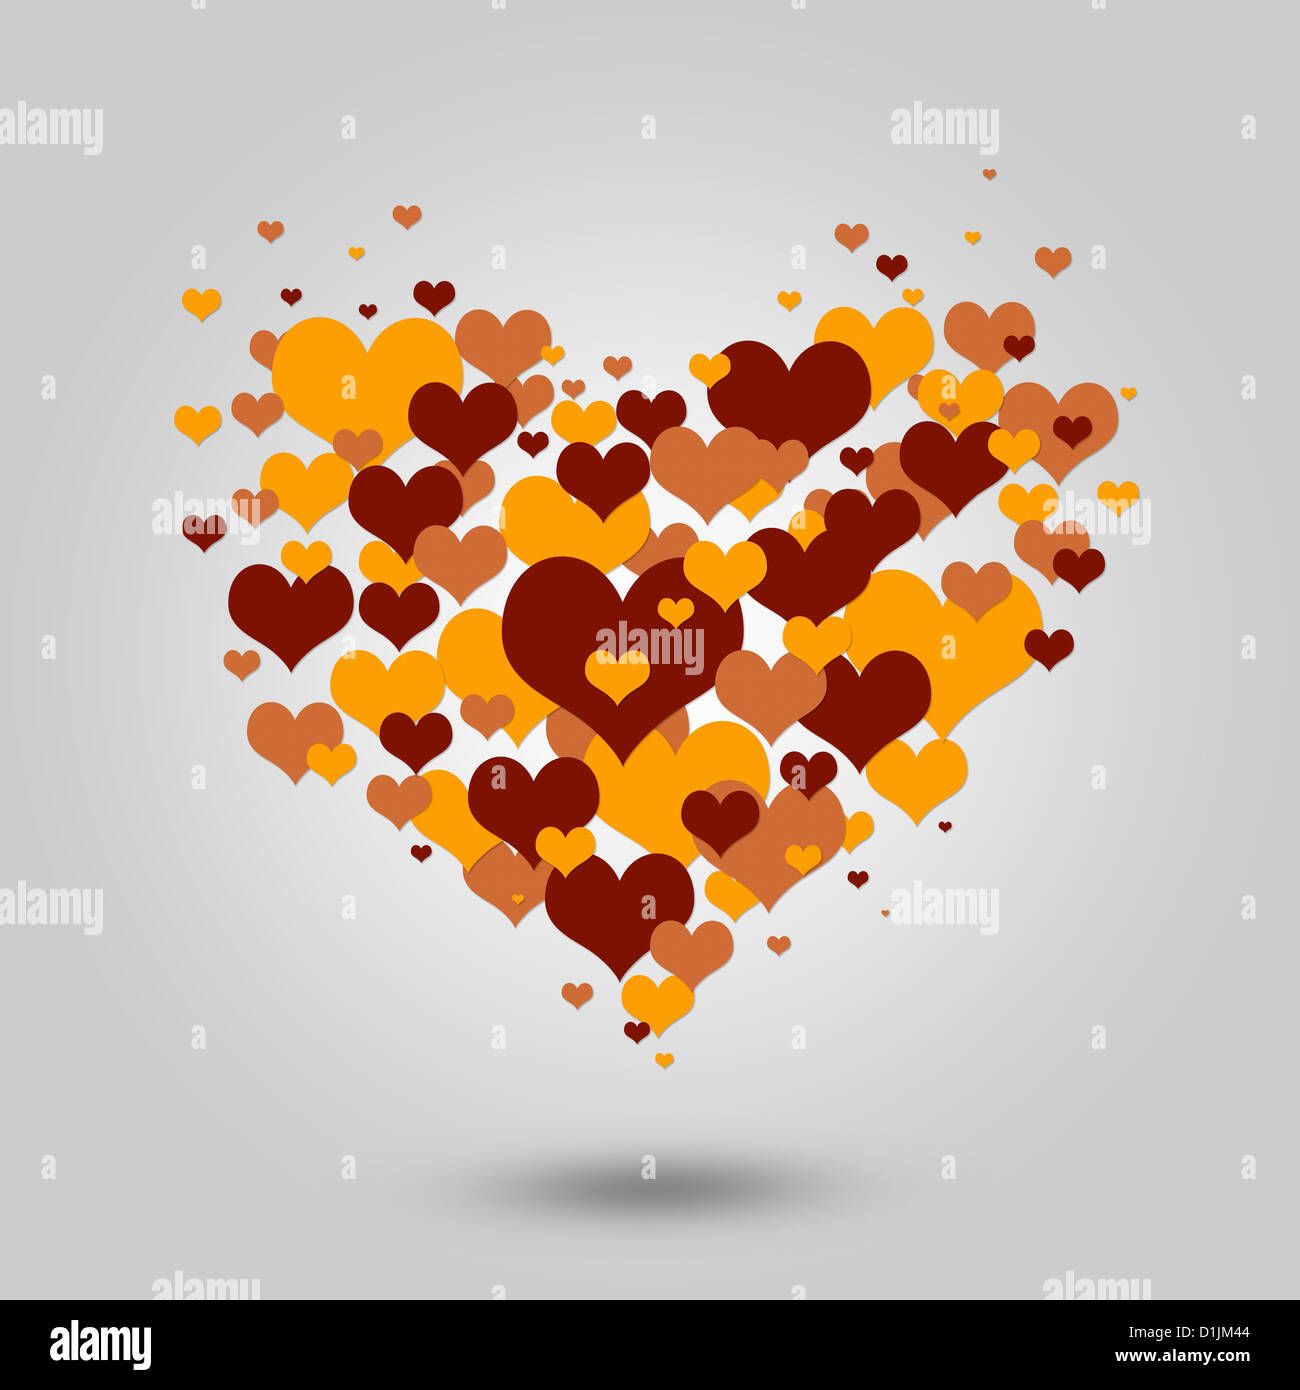 A heart illustration made out of hearts Stock Photo